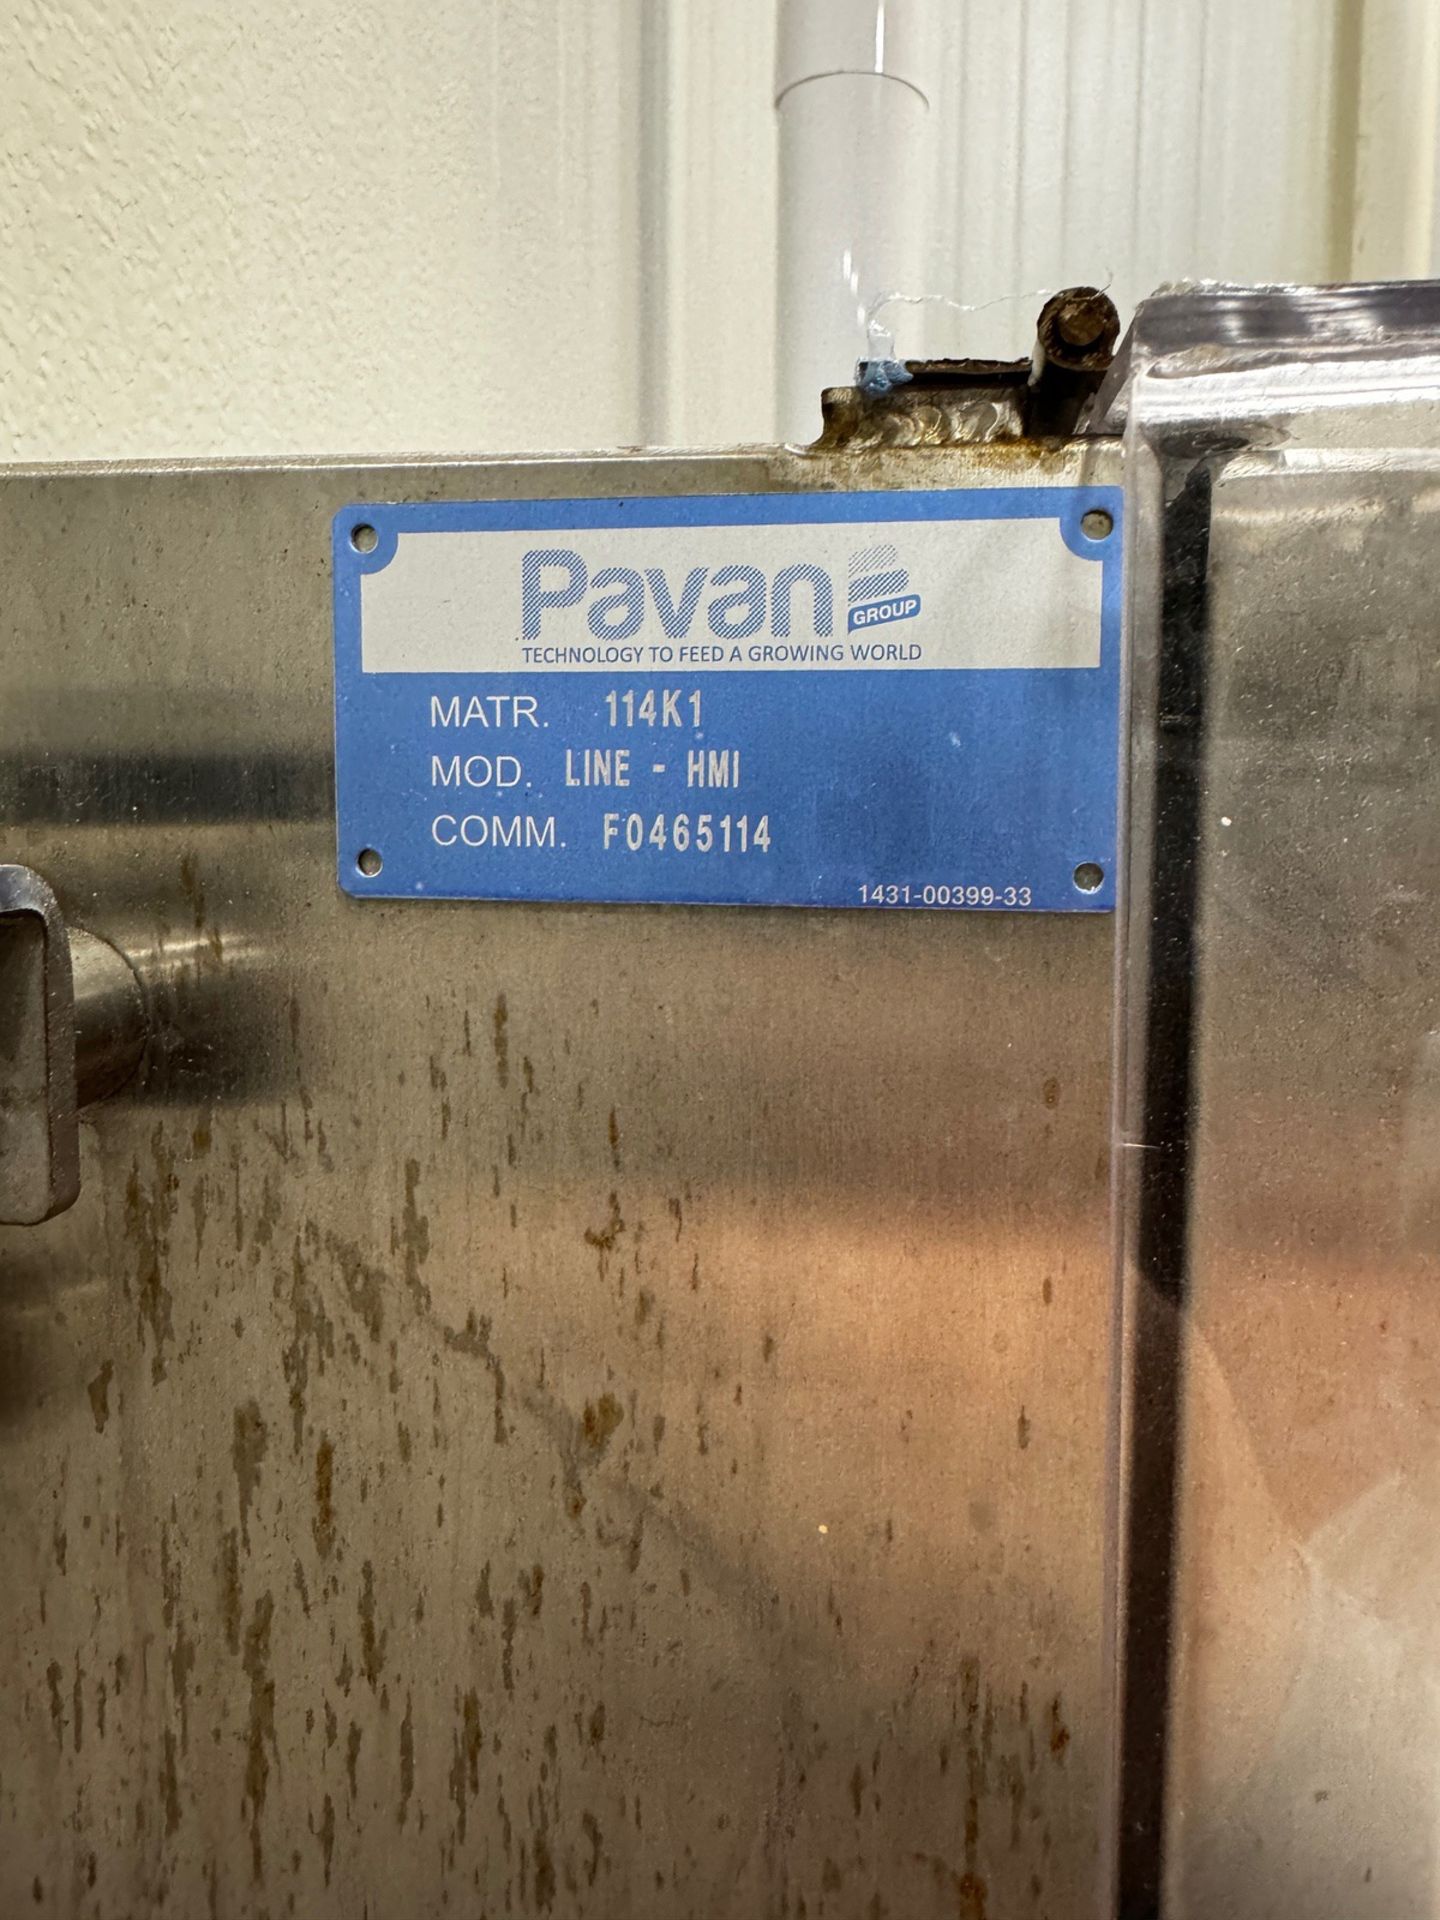 2018 Pavan COTTORE CV.100/3/6 Immersion Cooking Line with Vibratory Infeed Conveyor, Automated Hood - Image 8 of 8